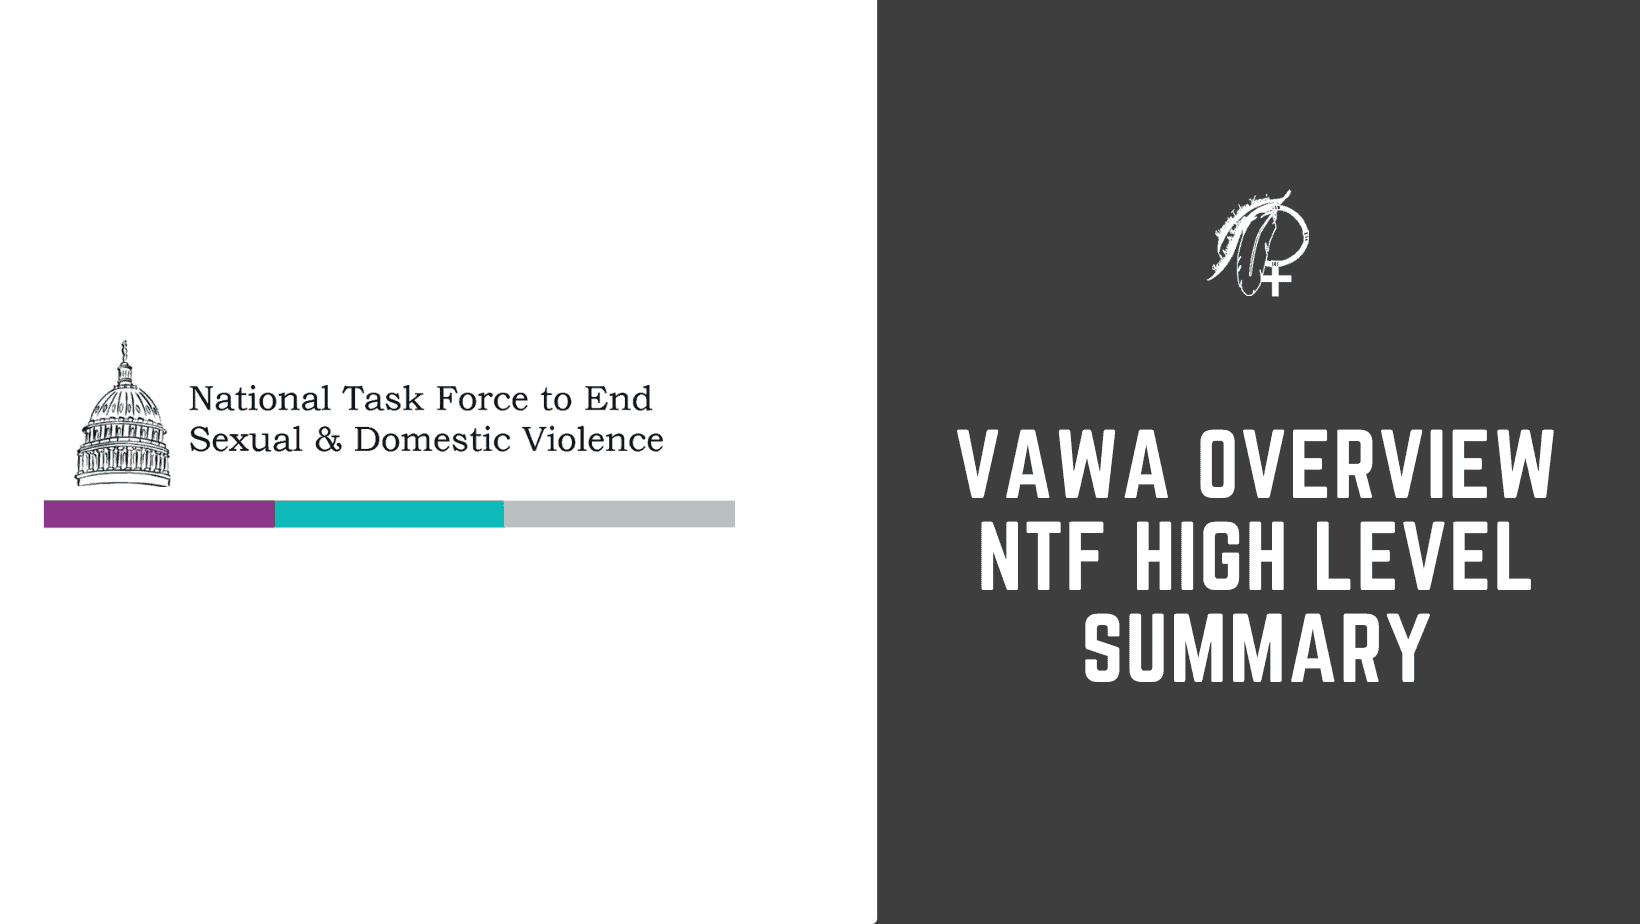 VAWA Overview NTF High Level Summary